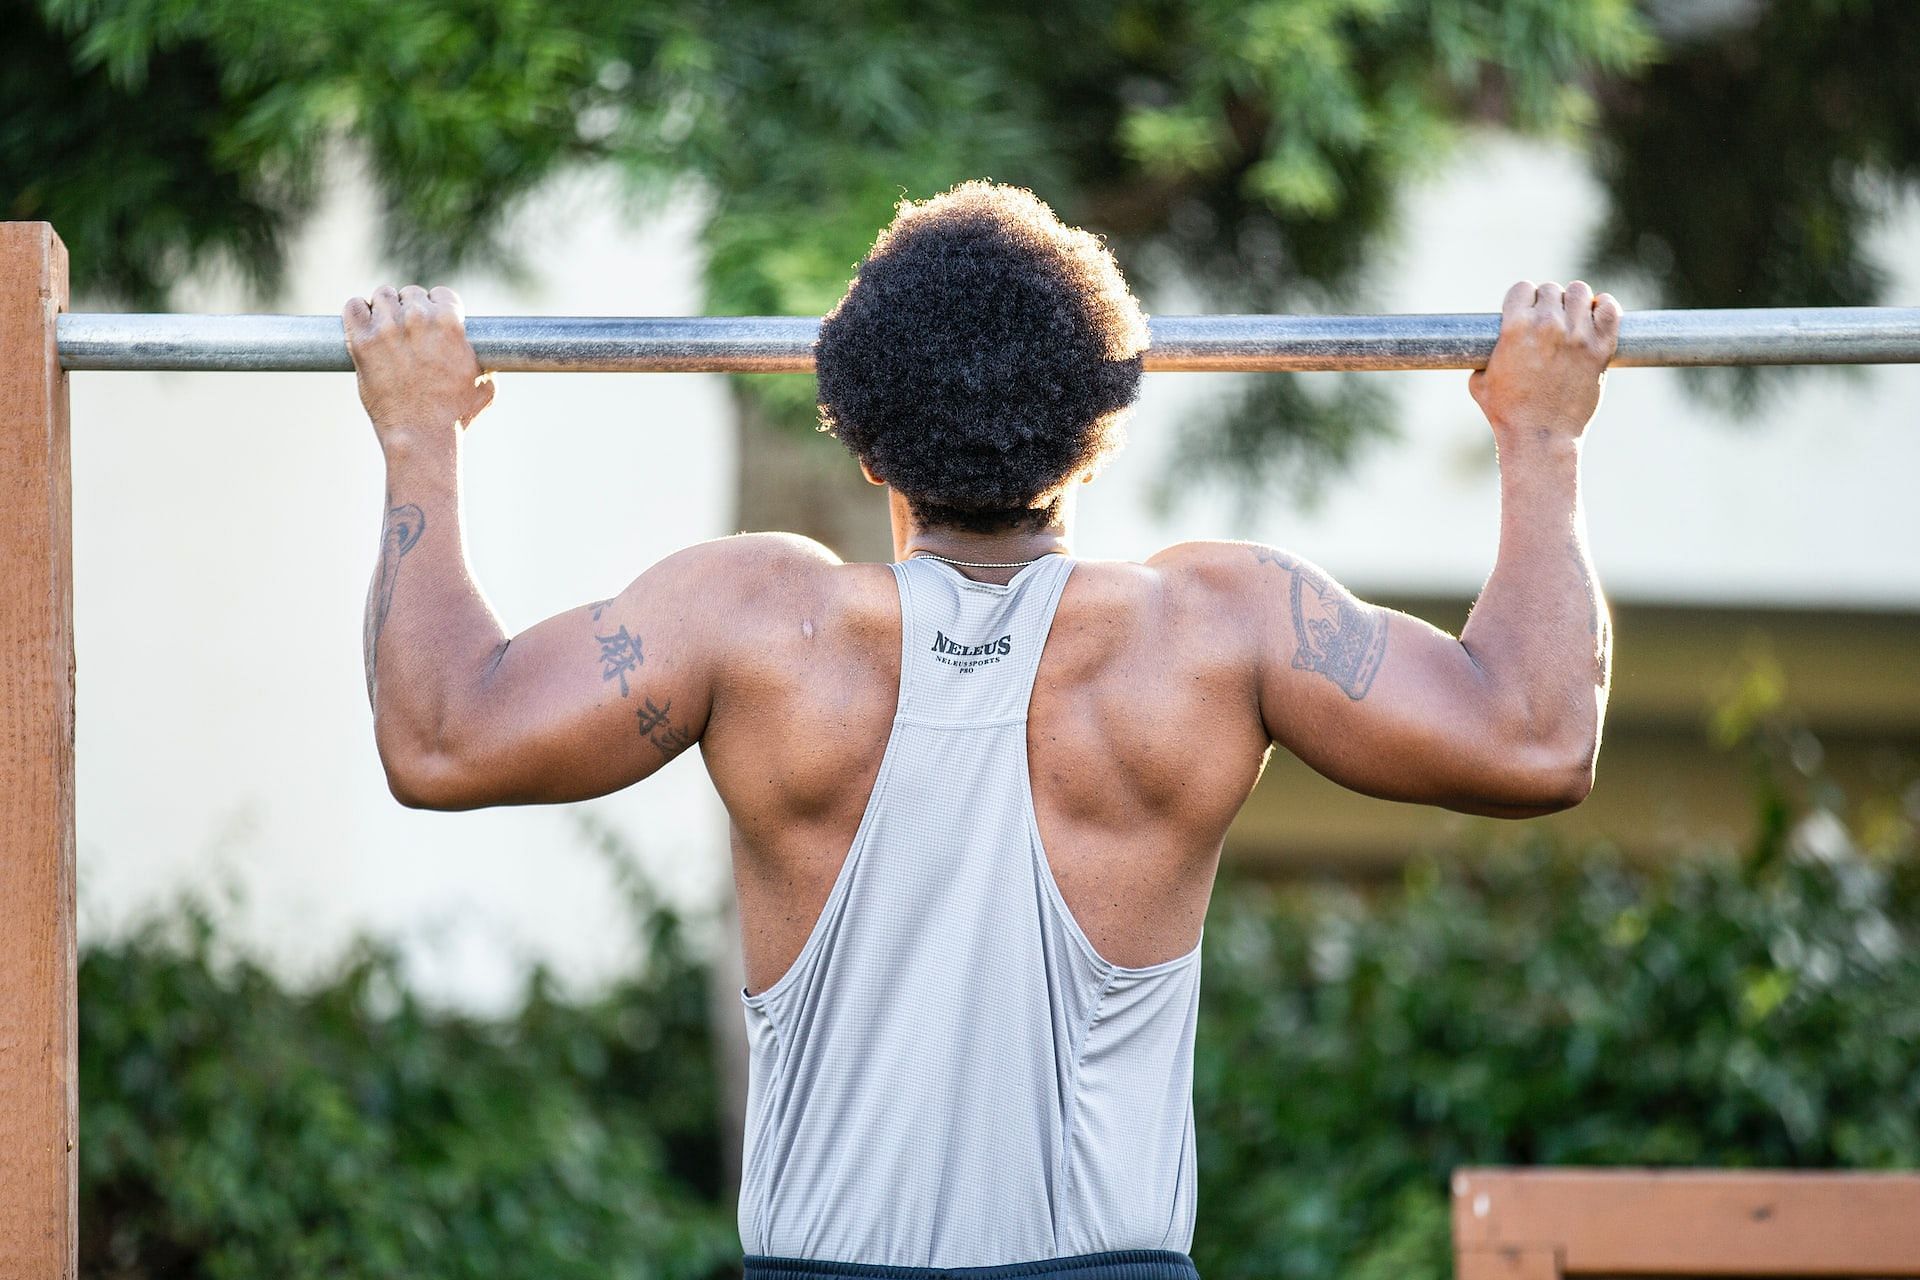 Lats and biceps are among the muscles pull-ups work on (Photo by Lawrence Crayton on Unsplash)